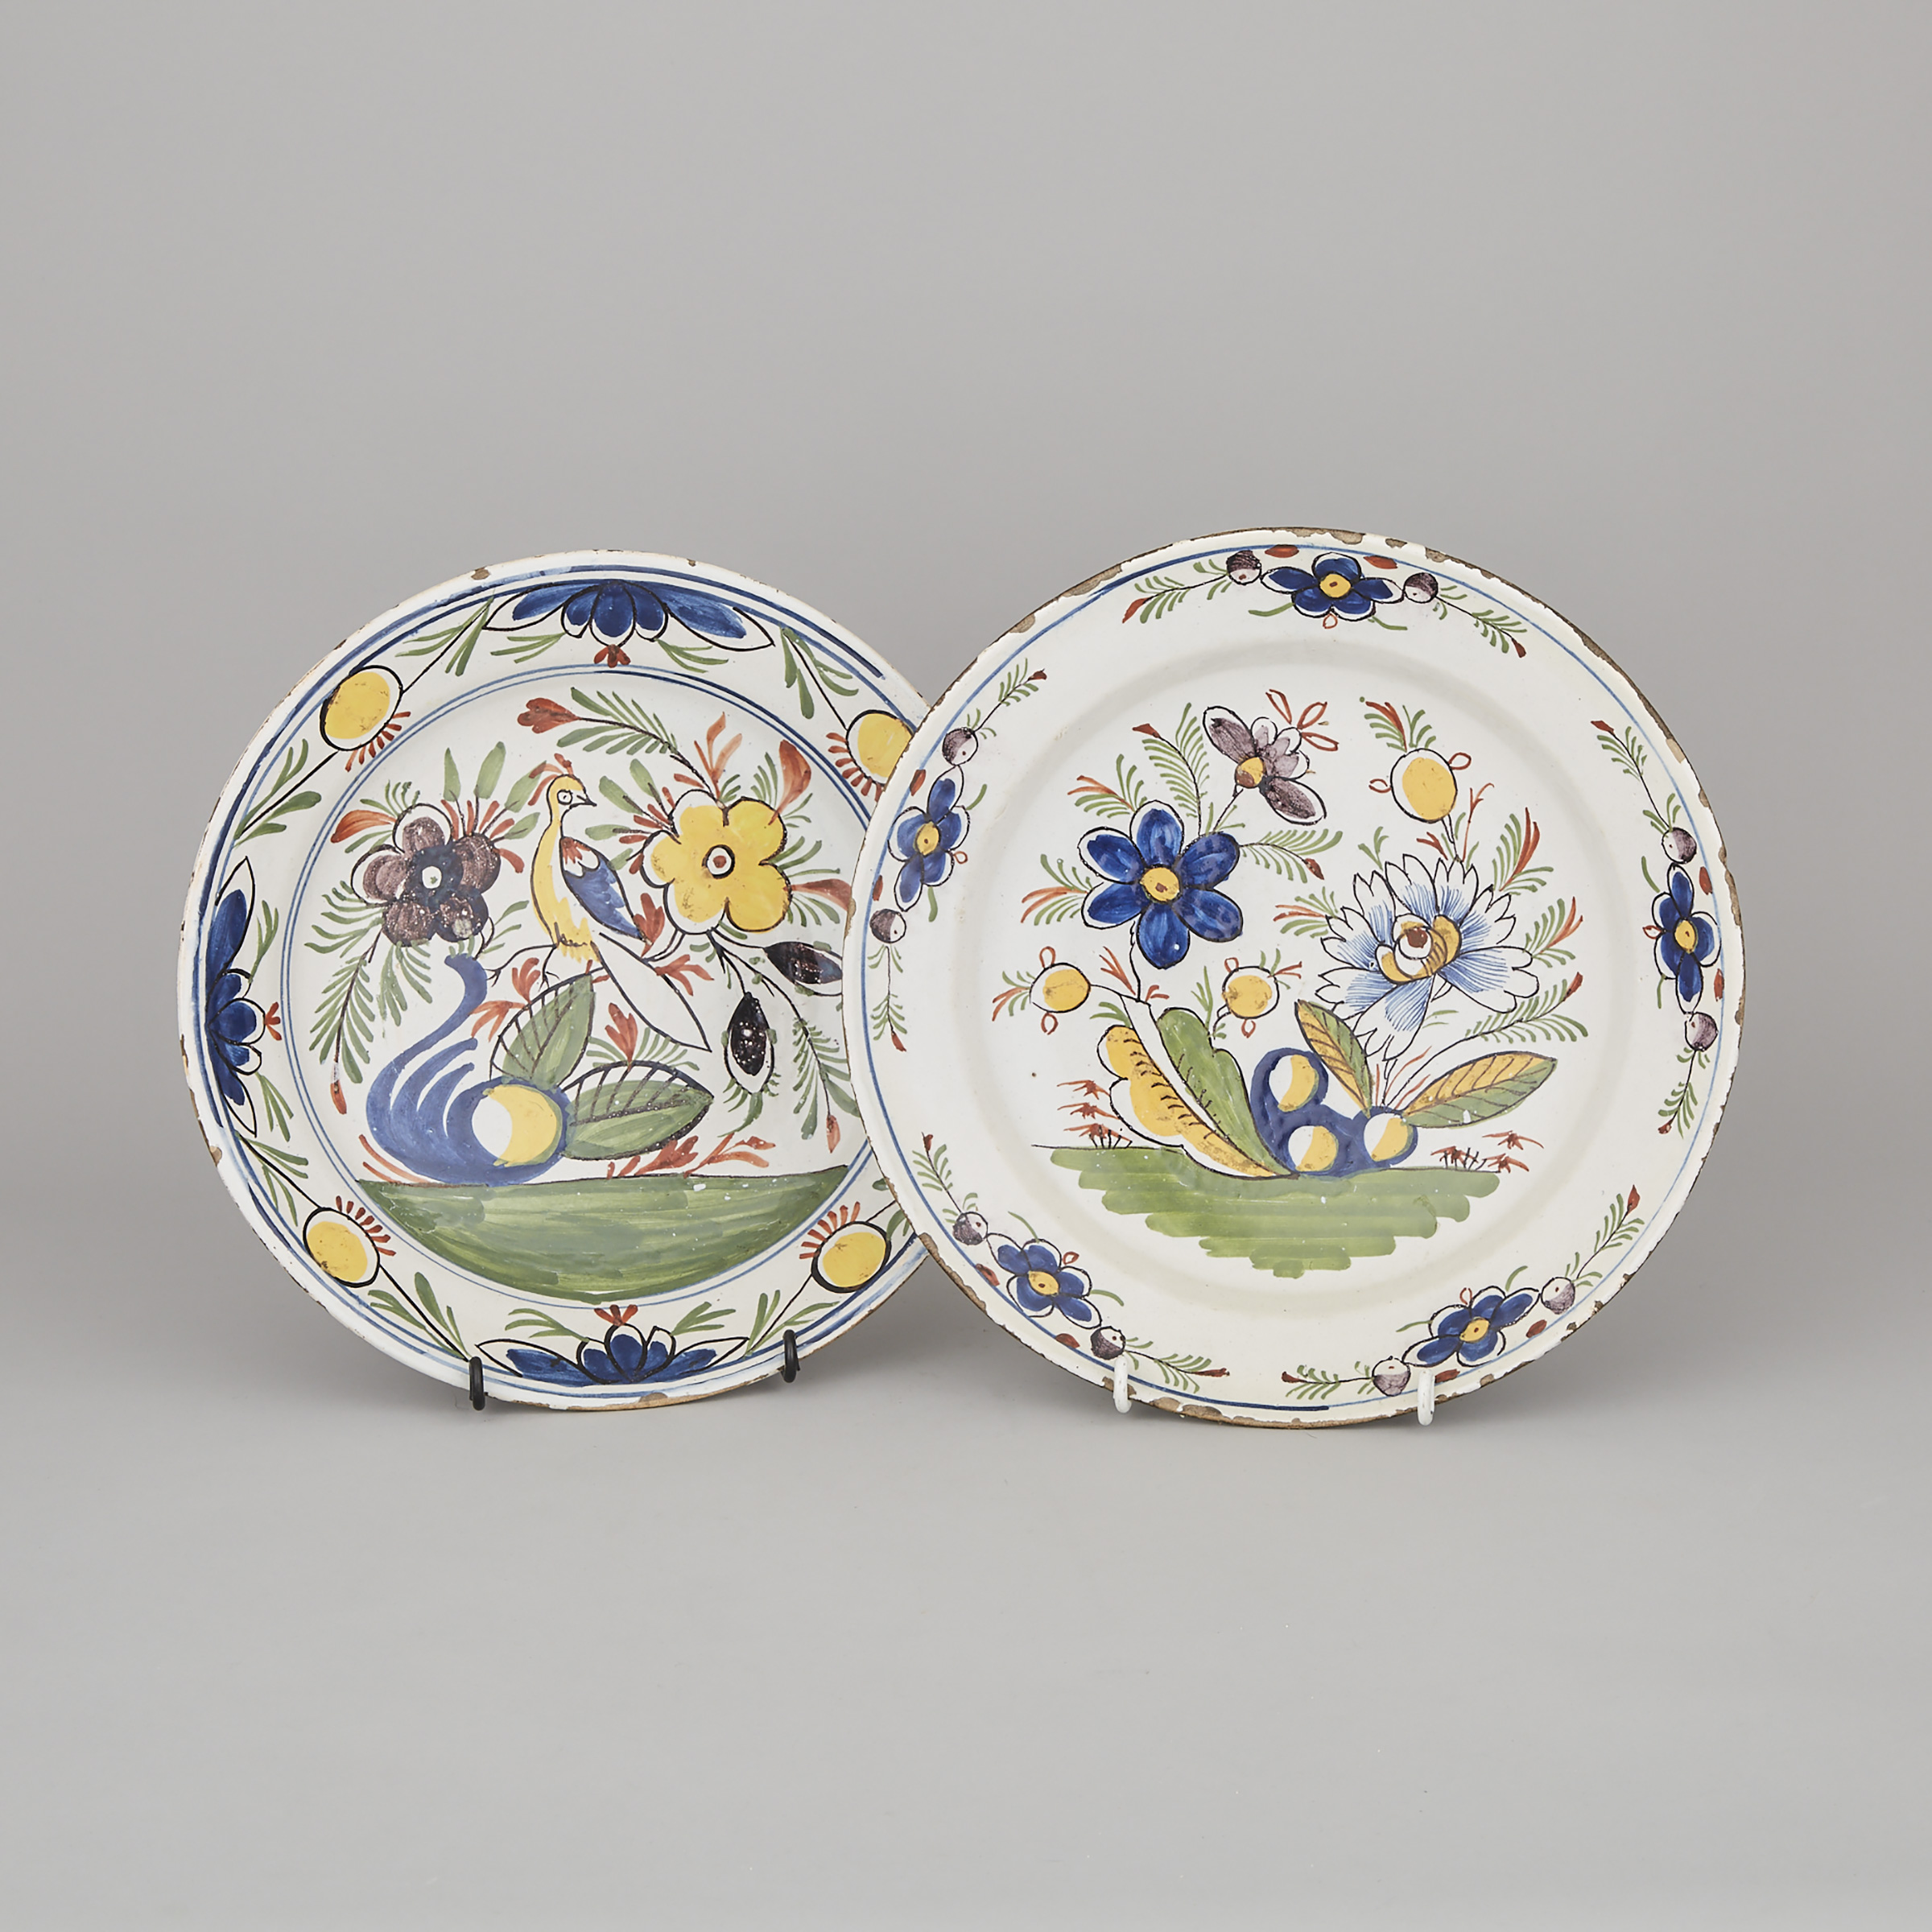 Two Continental Faience Polychrome Chargers, probably Spanish, 18th/19th century